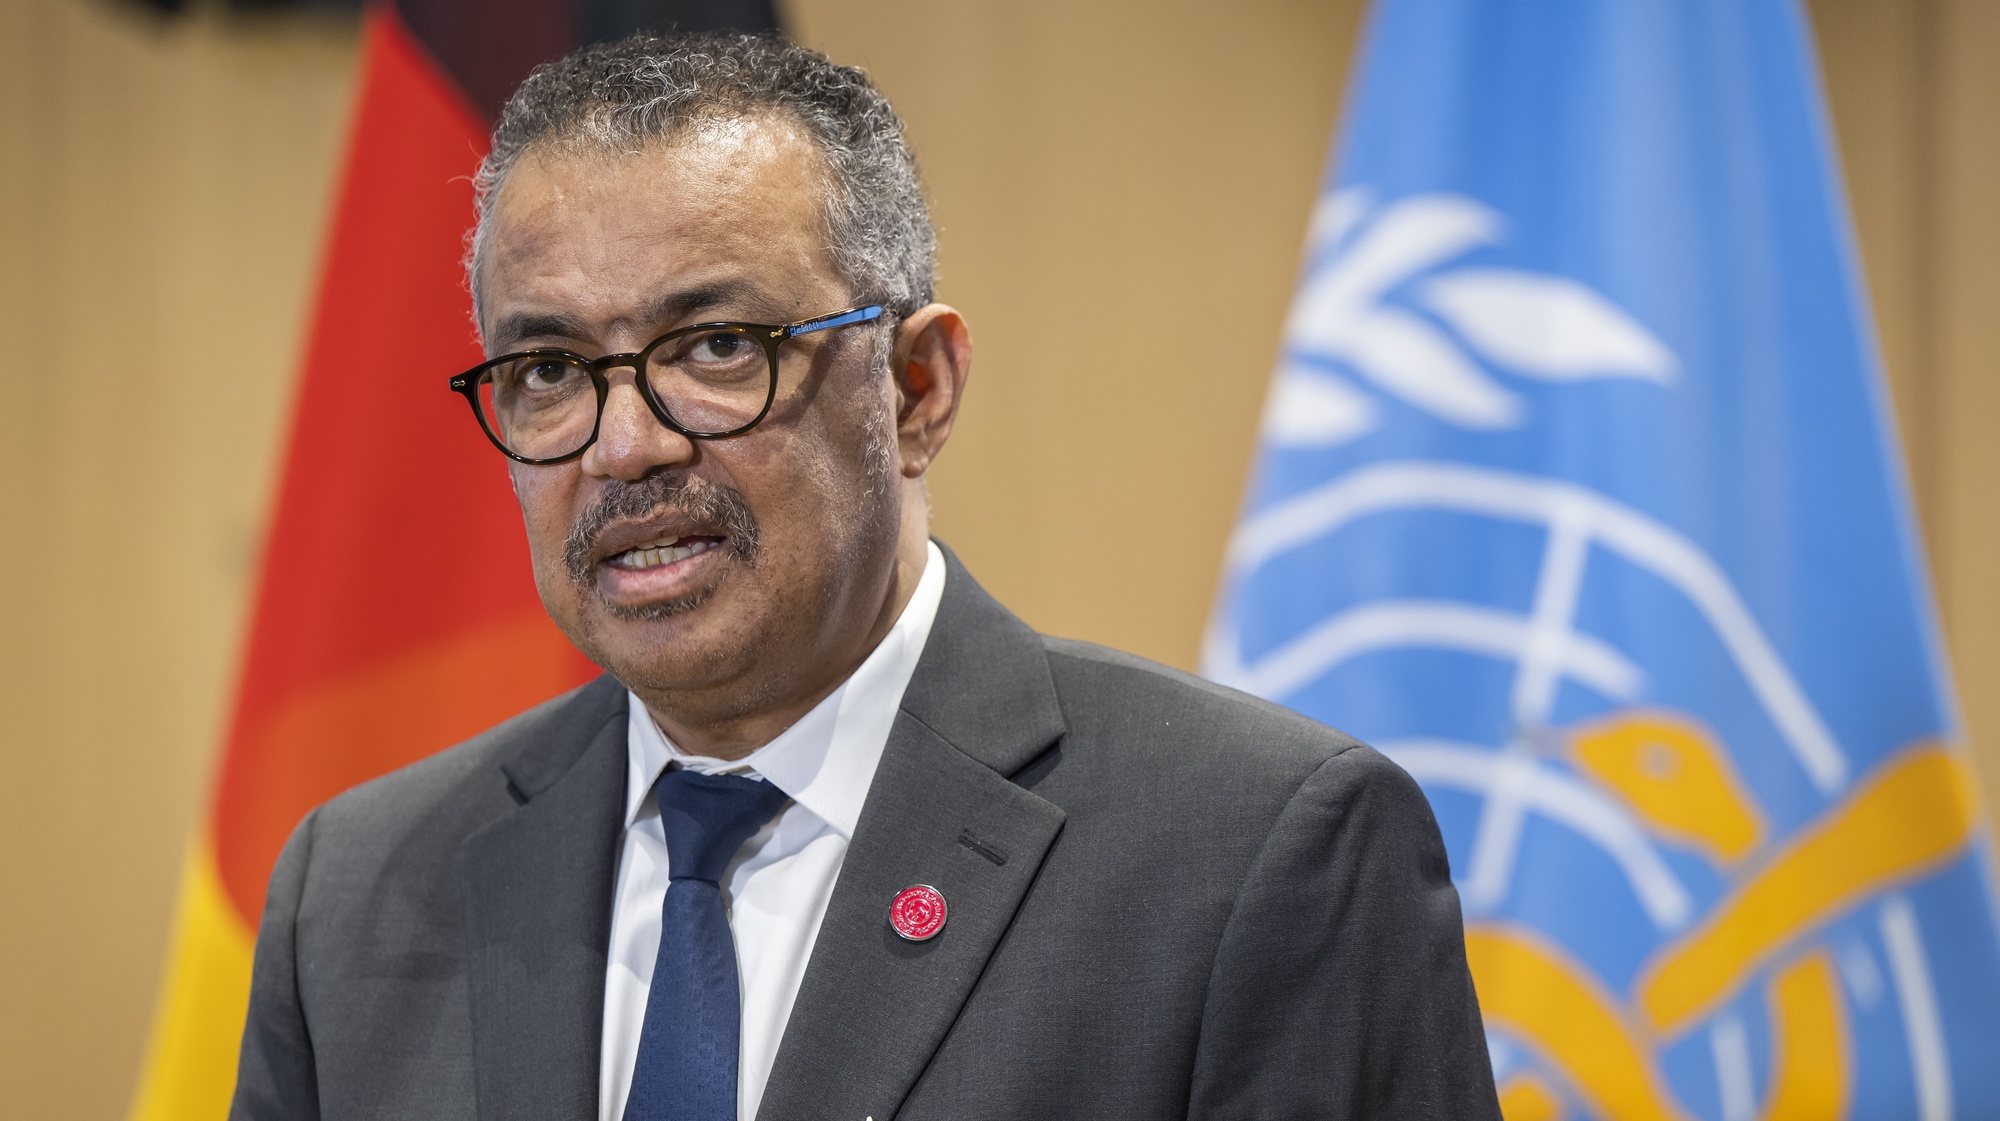 epa10444374 Tedros Adhanom Ghebreyesus, Director General of the World Health Organization (WHO), speaks to the media, during a press conference after a visit German Health Minister to the World Health Organization (WHO) headquarters in Geneva, Switzerland, 02 February 2023.  EPA/MARTIAL TREZZINI